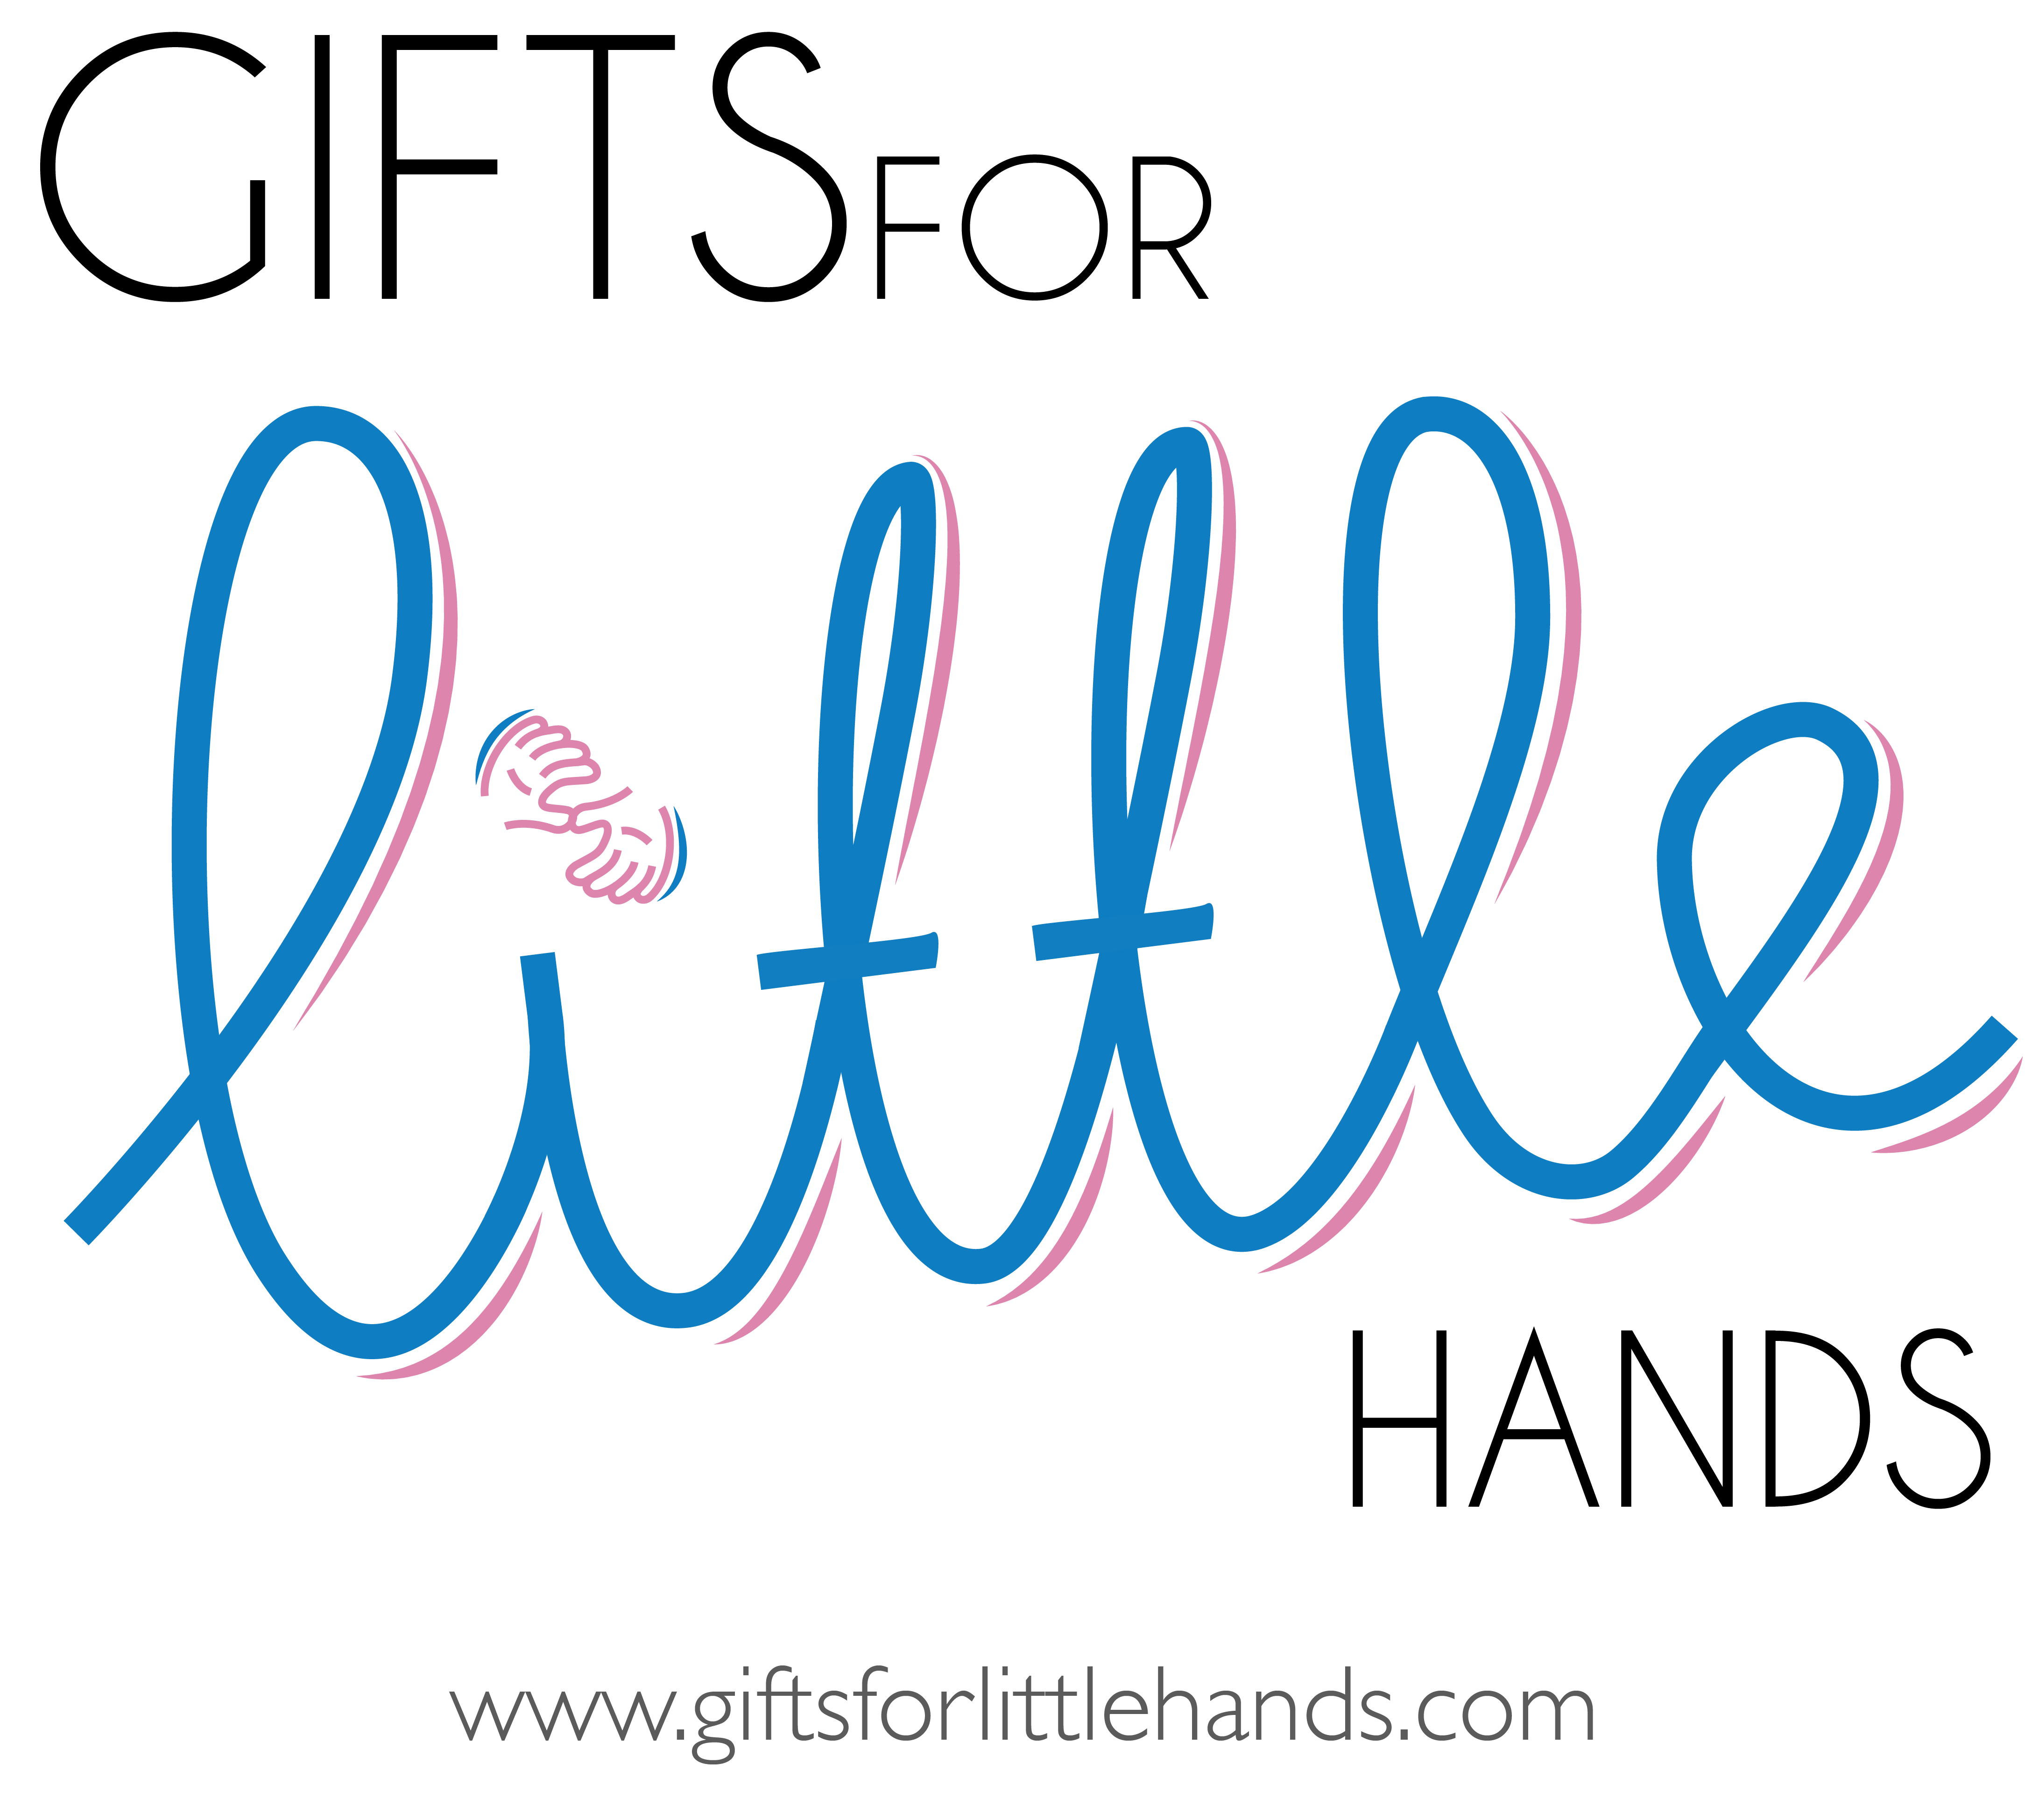 Gifts for little hands's logo